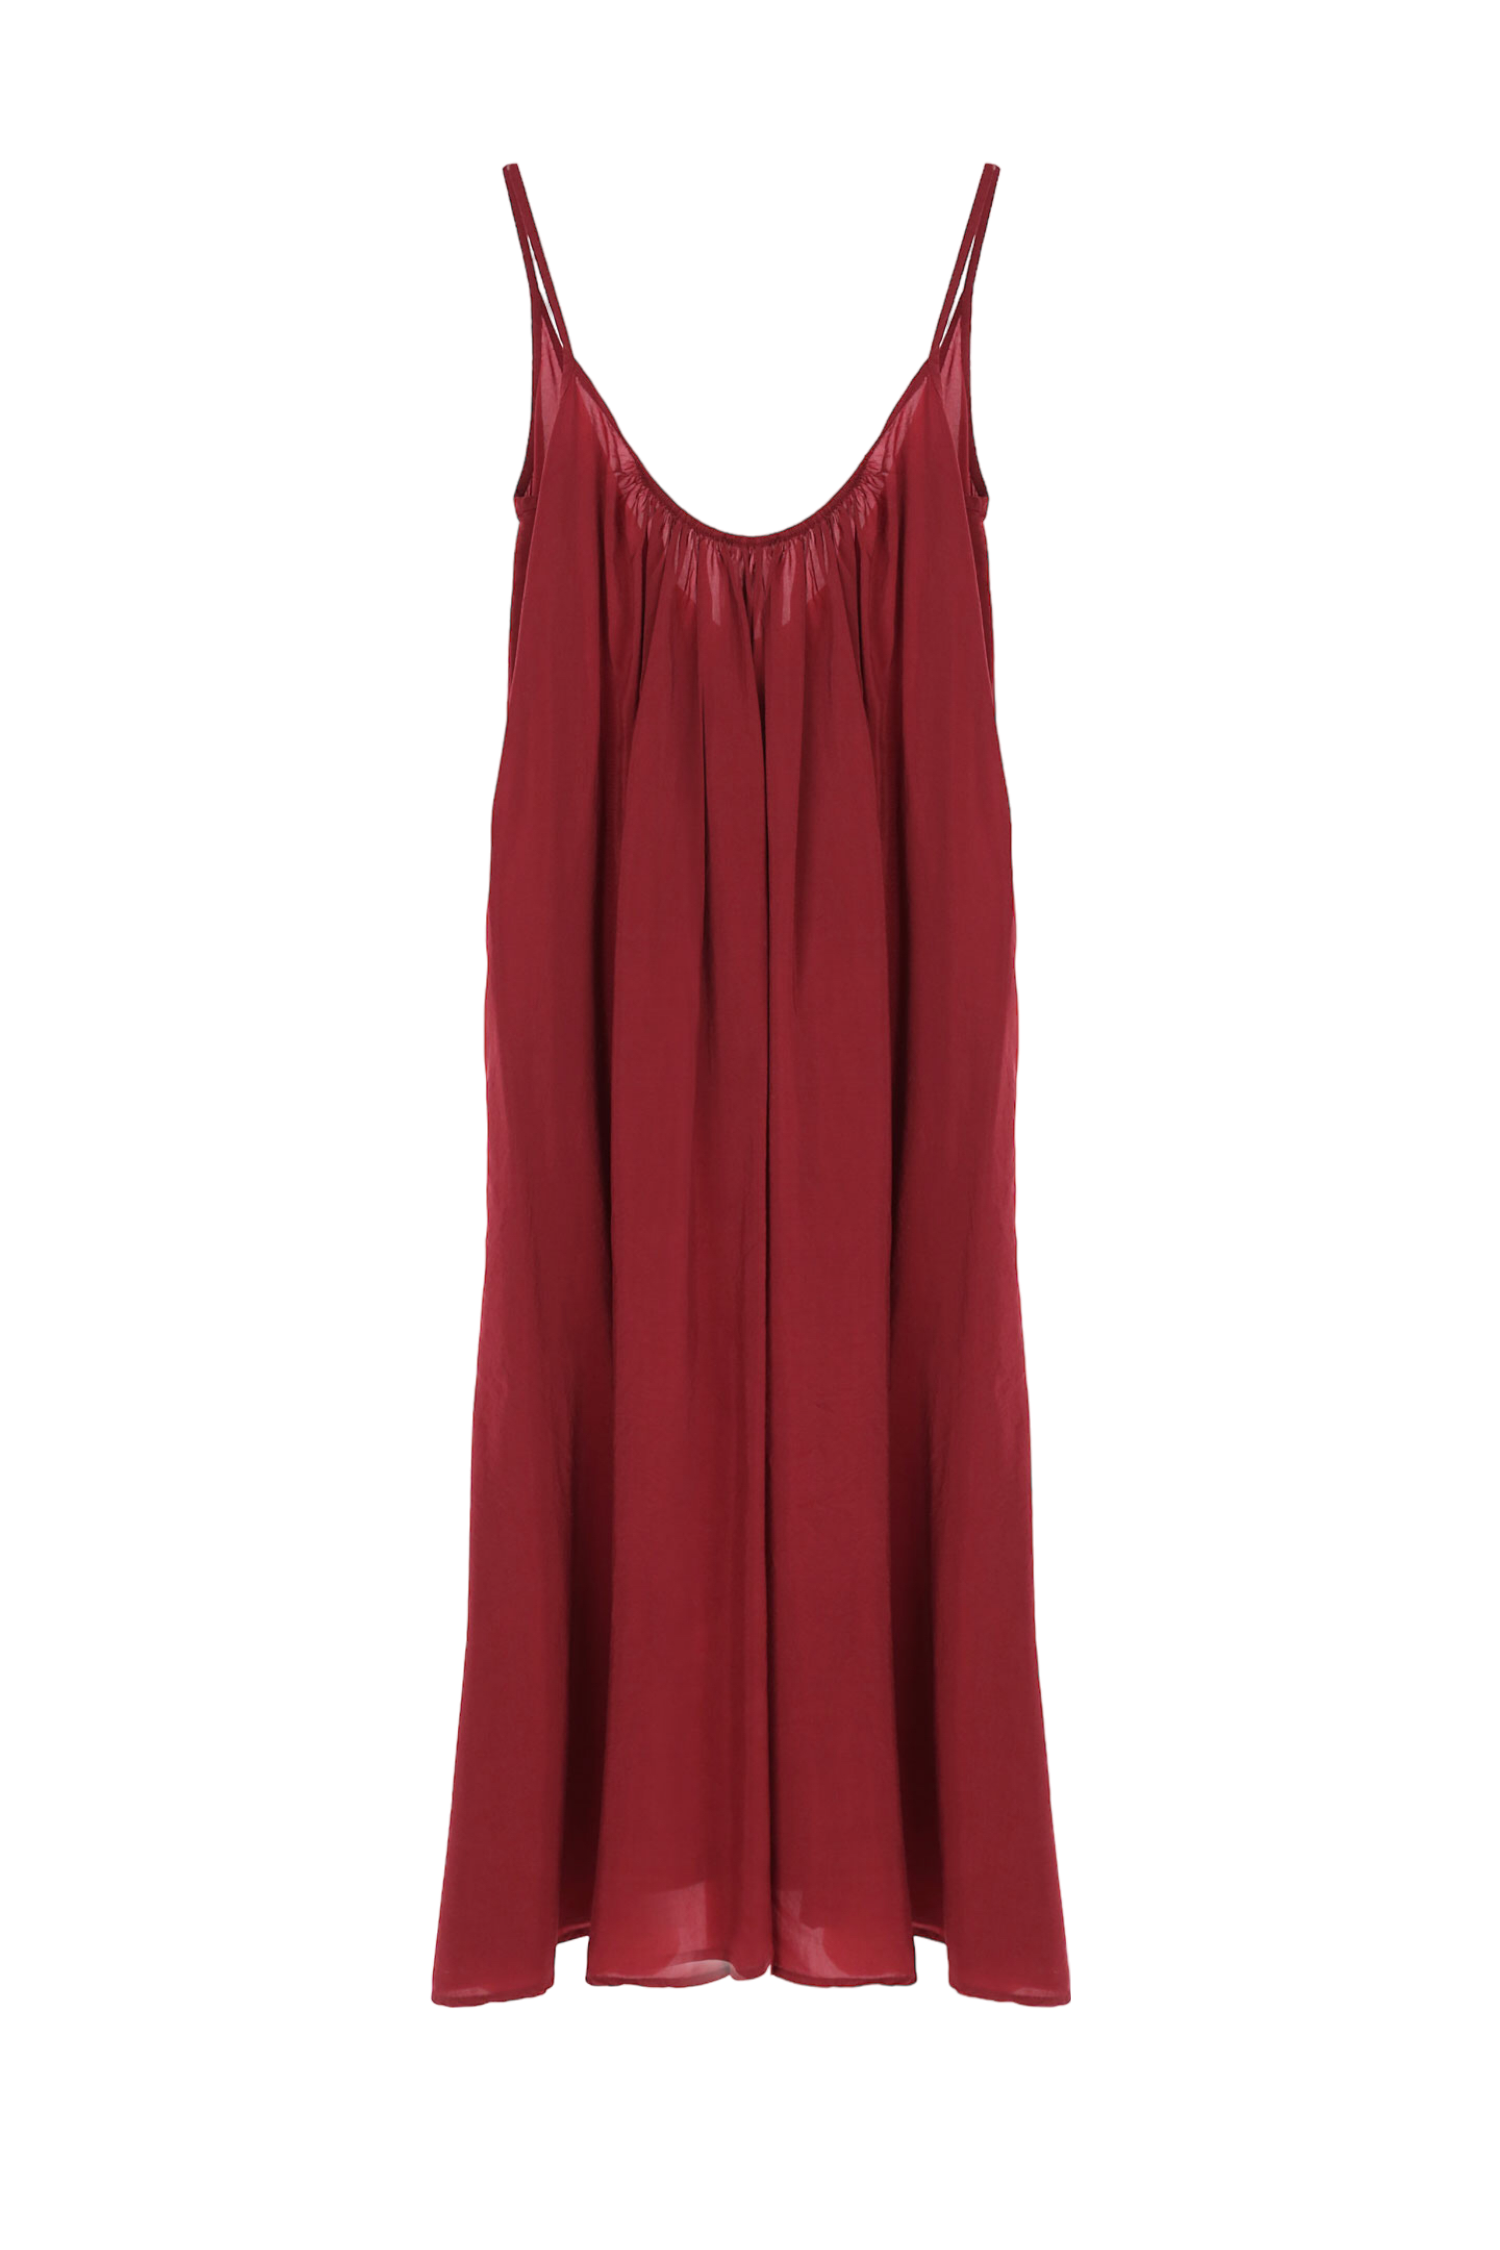 Dixie india red dress